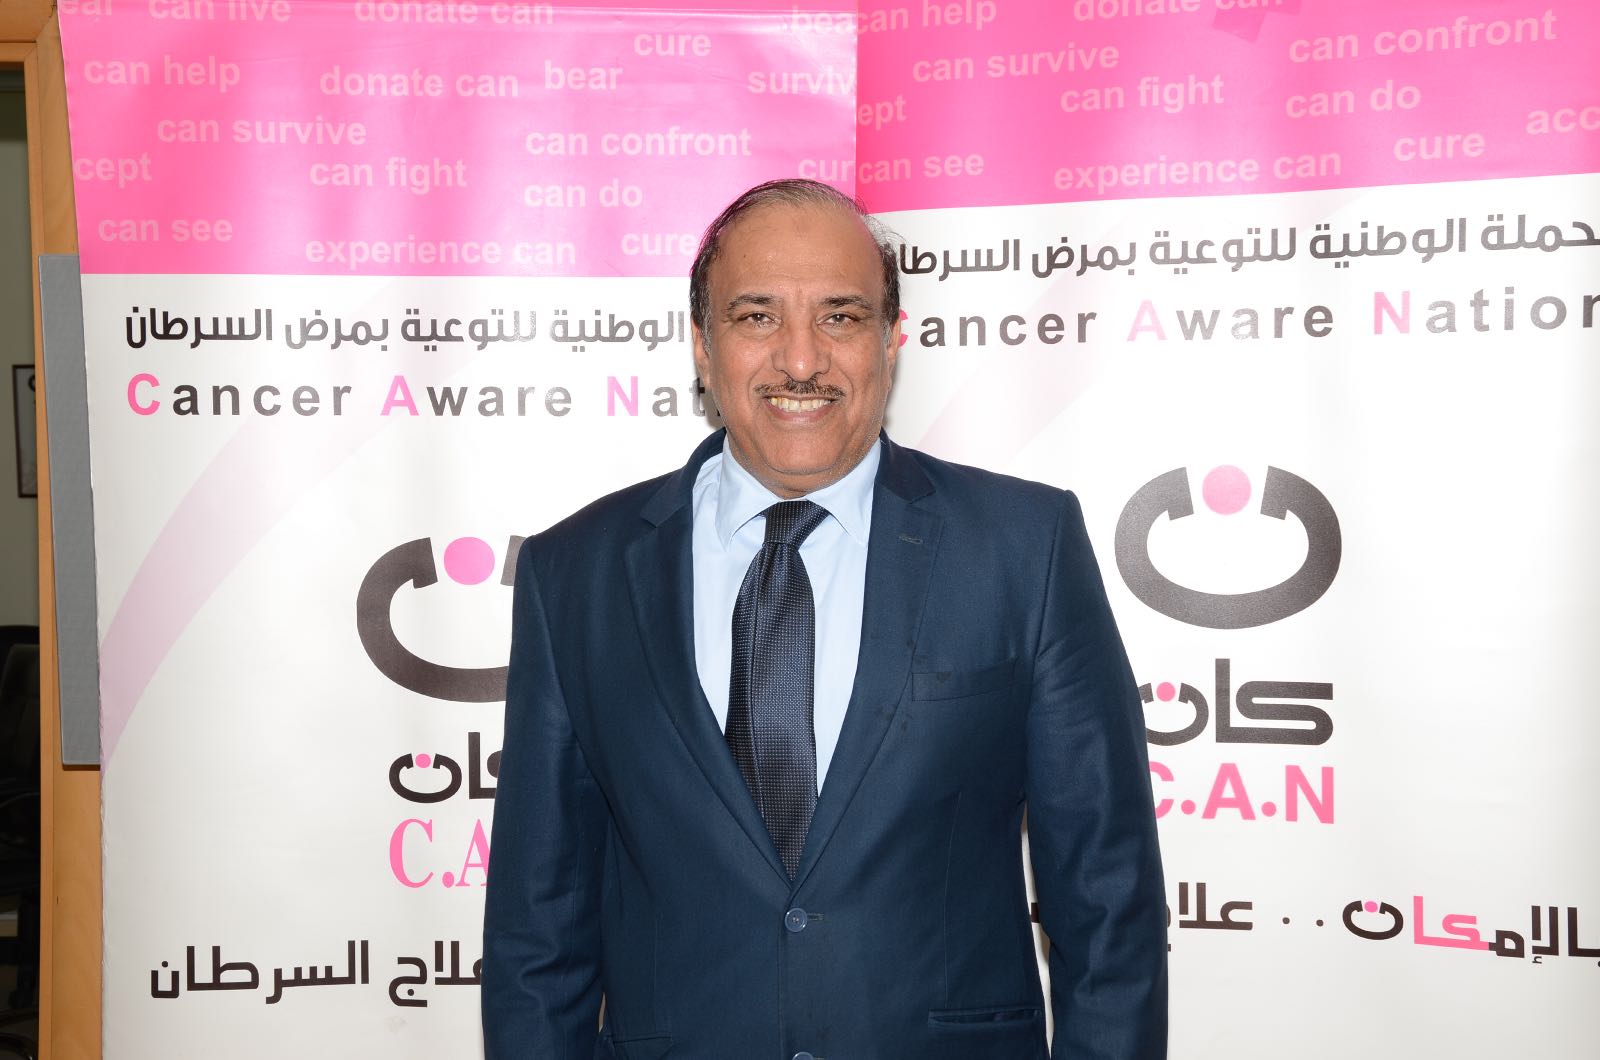 Deputy board chairman of the national campaign for promoting awareness of cancer (C.A.N.), Khaled Al-Saleh